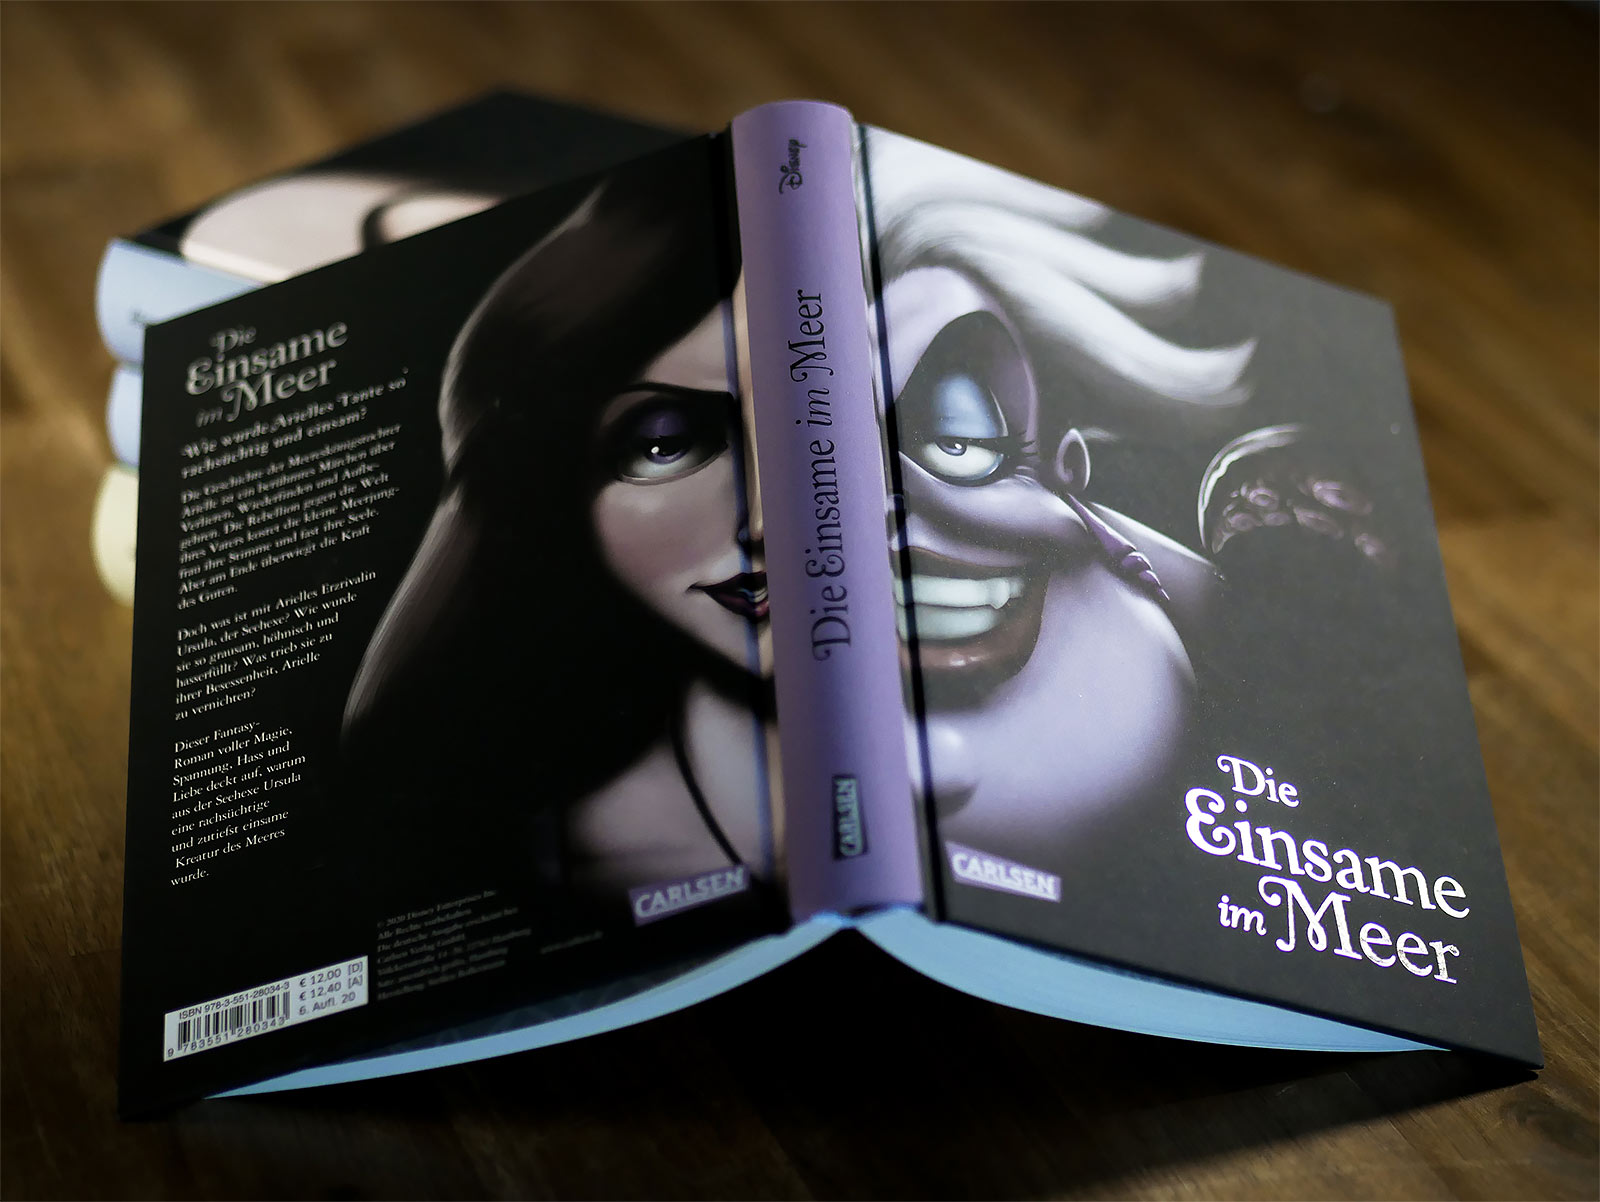 Disney Villains 3 - The Lonely in the Sea